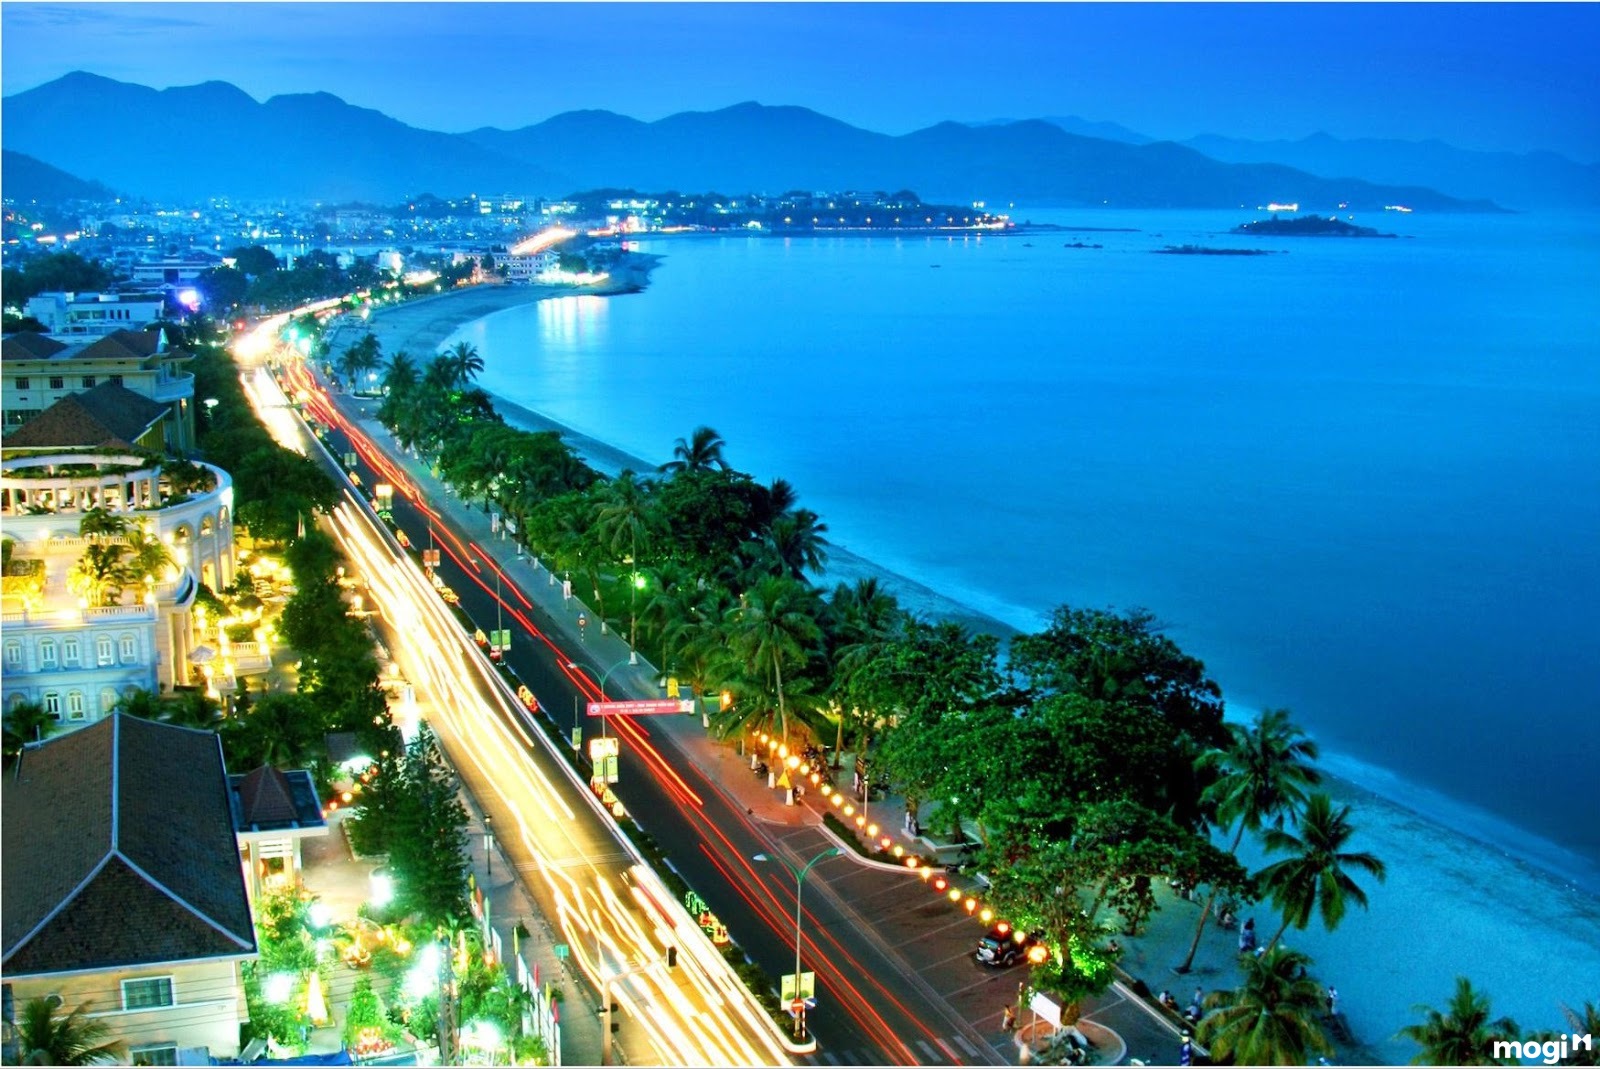 Feeling dizzy with crowded hotels and resorts, many families want to rent an apartment or villa for short breaks in Da Nang